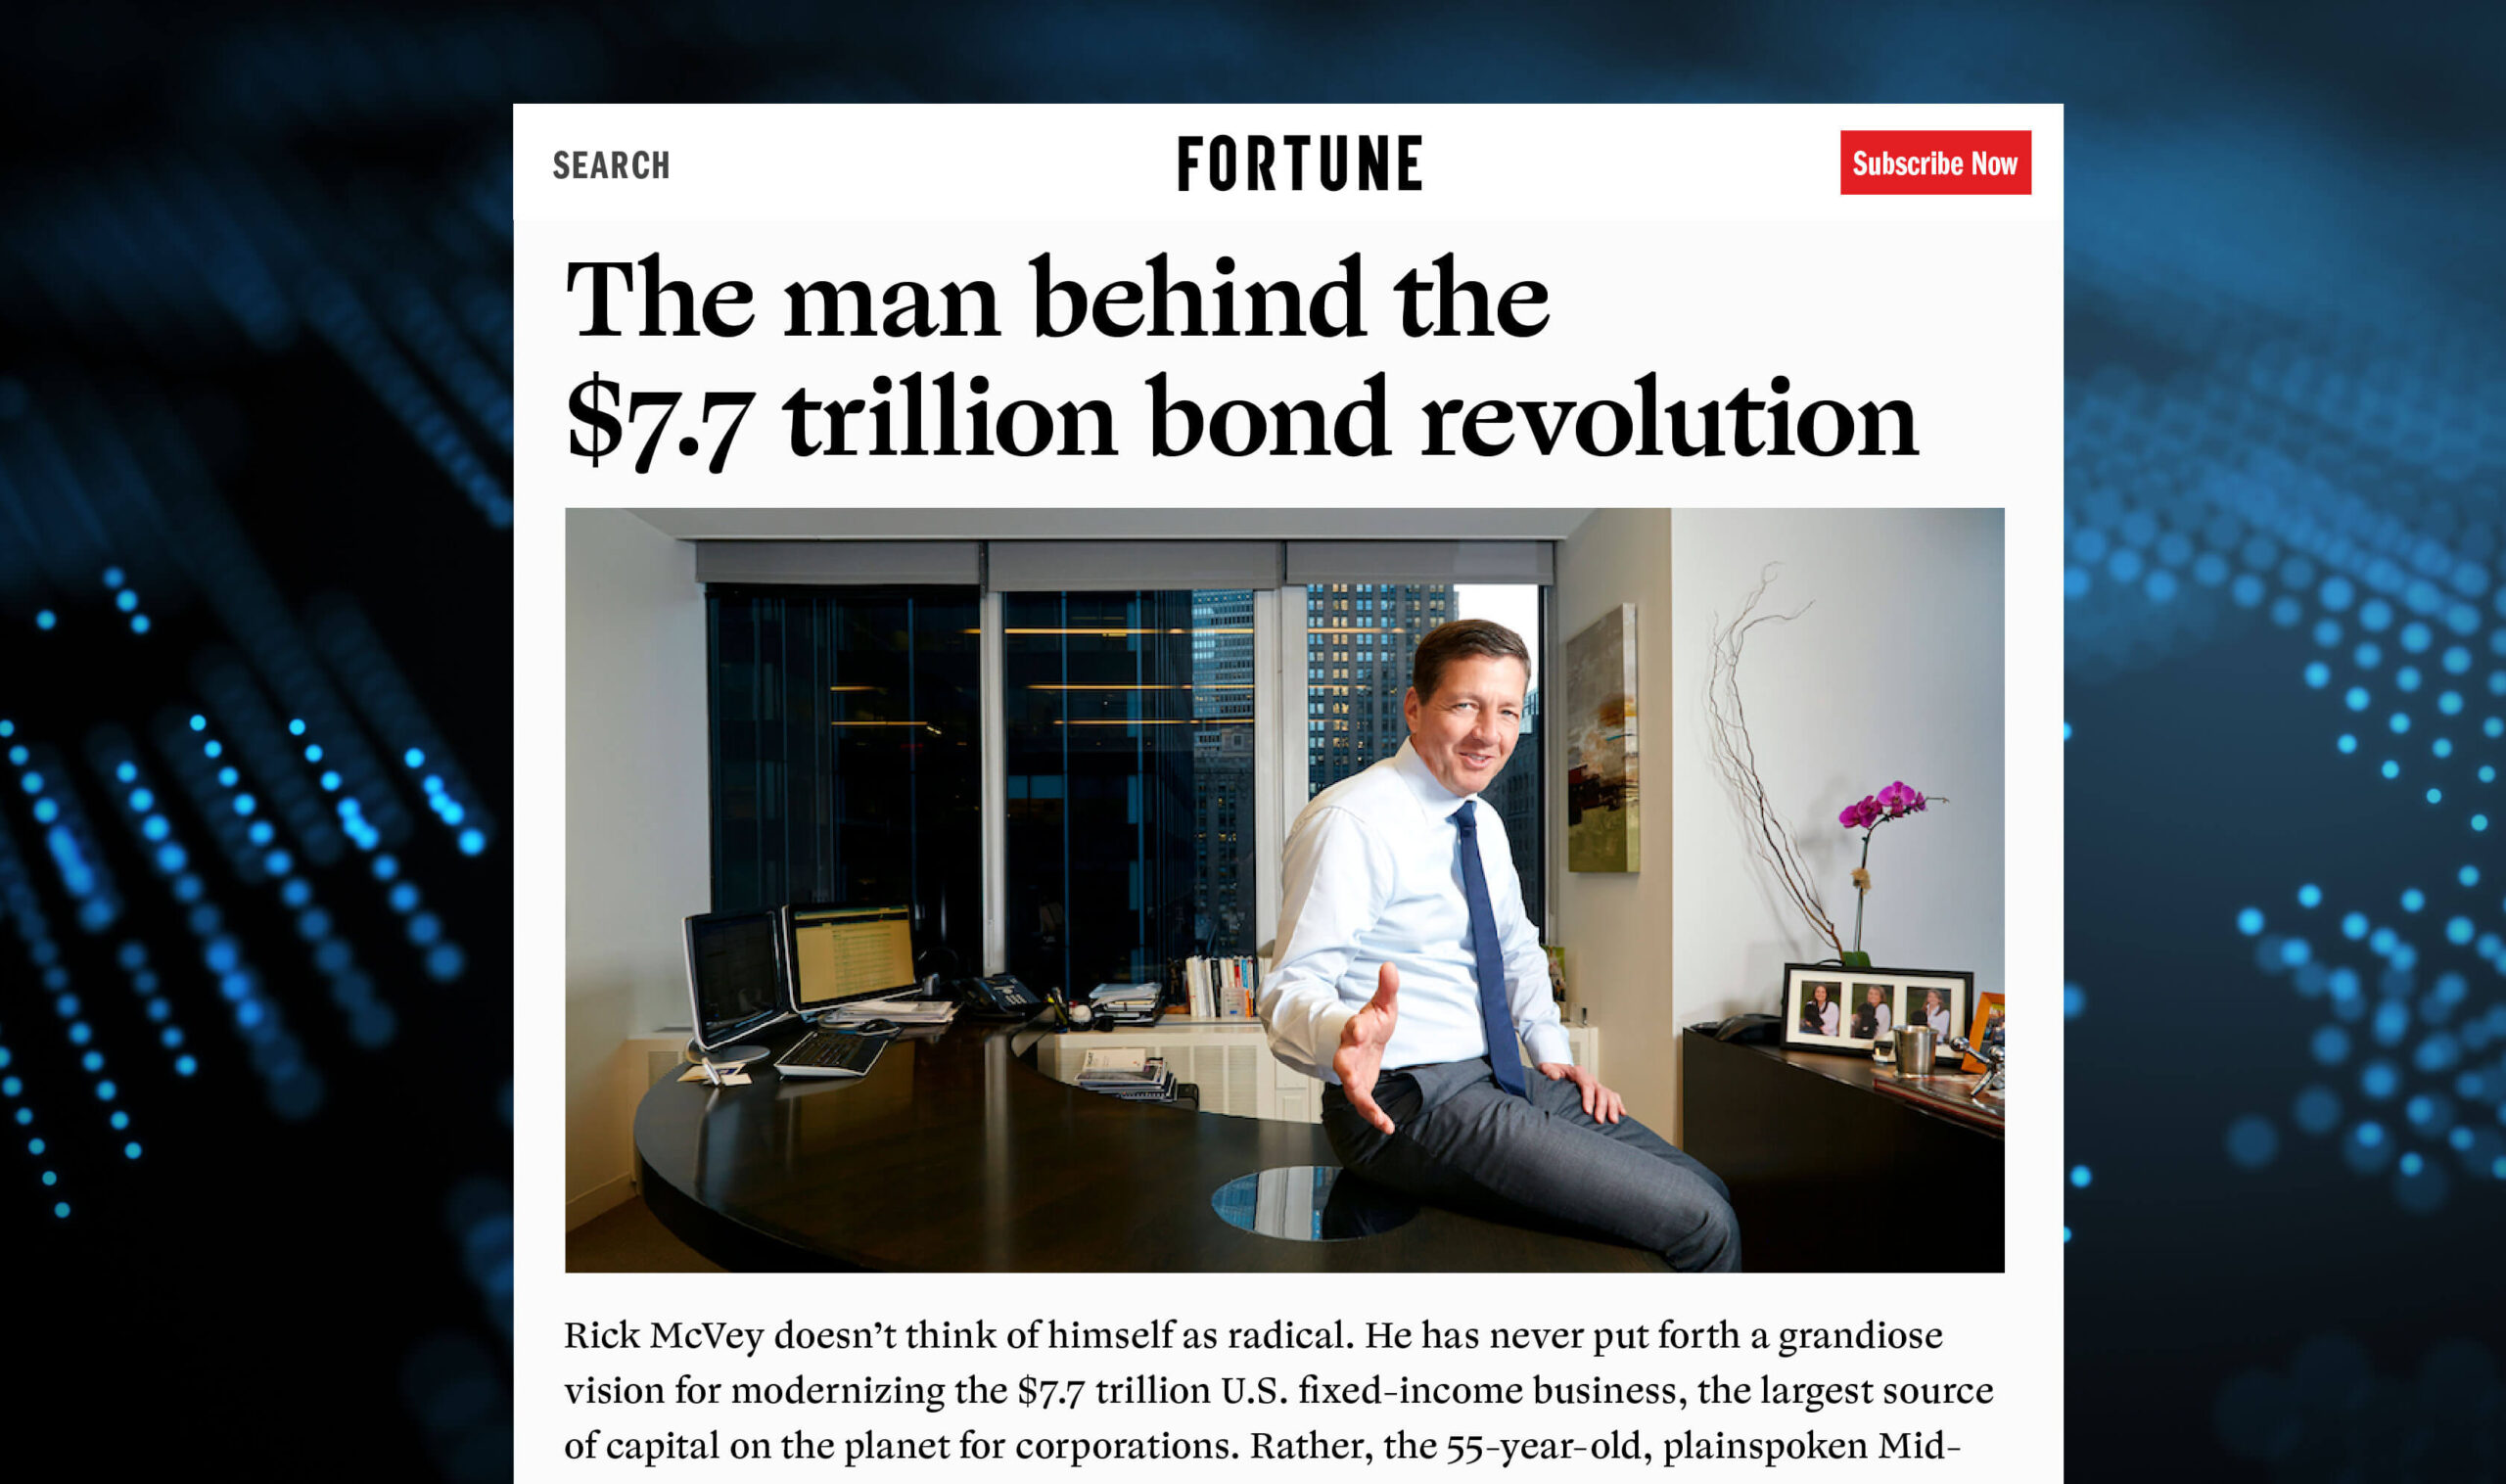 Fortune story on Rick McVey called 